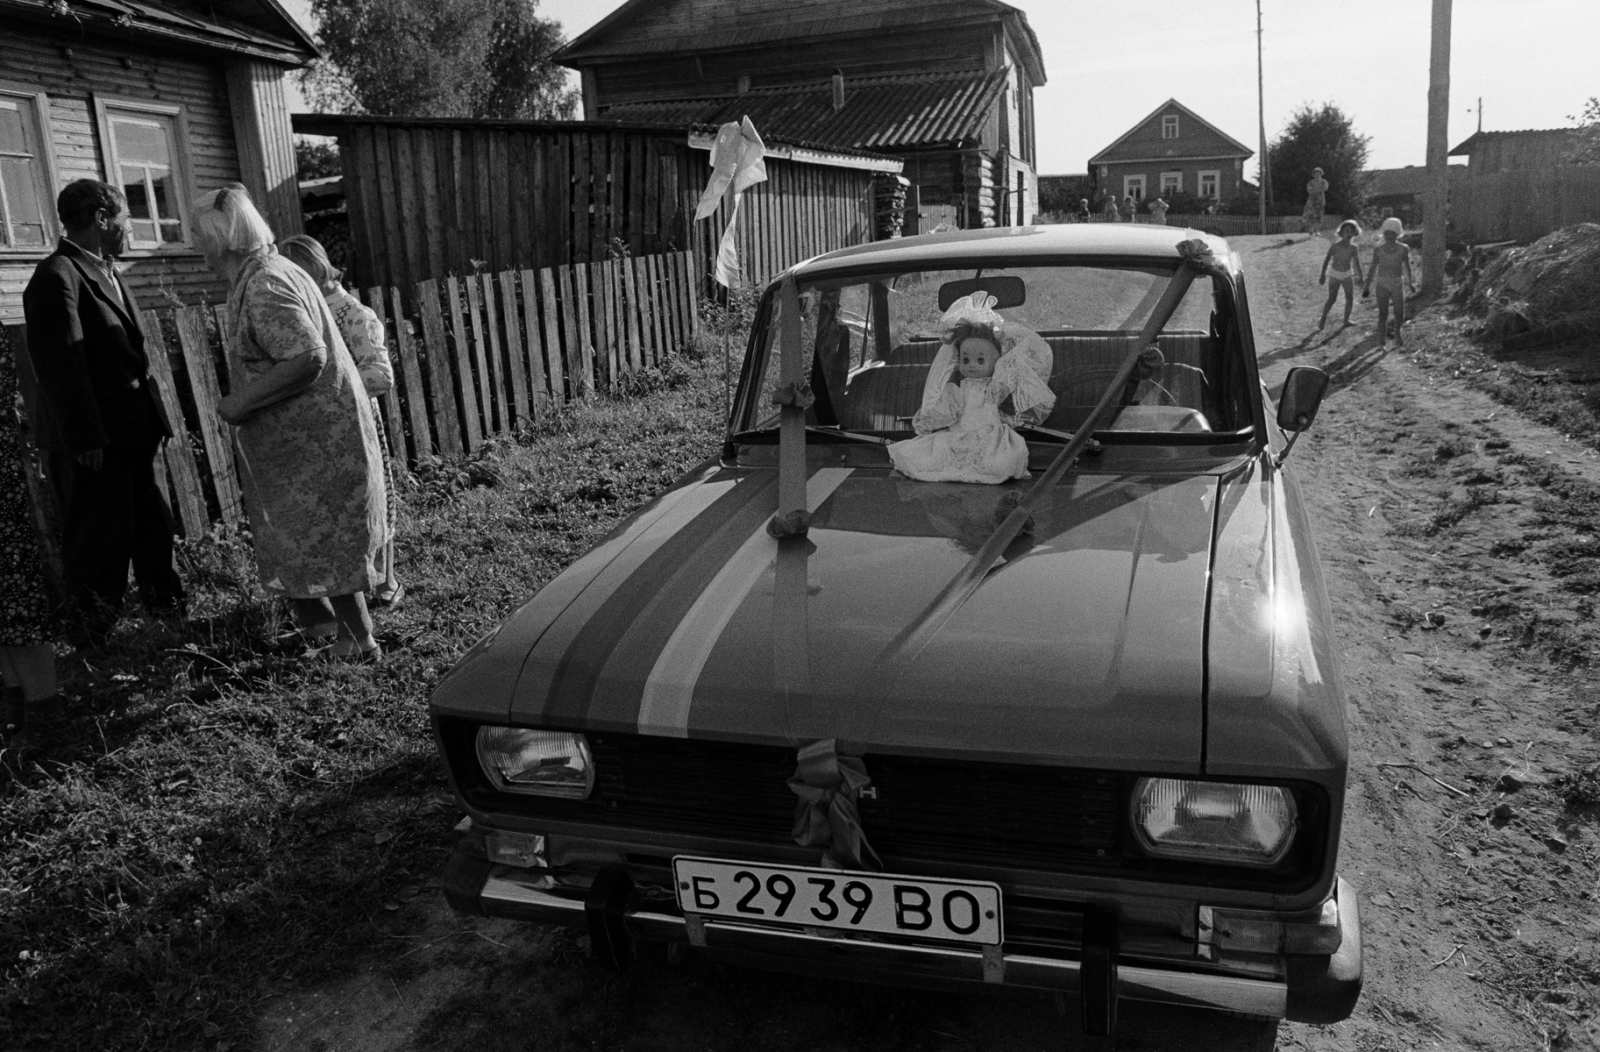 Russia - The Village of Anufrievo - A wedding couple bring their car to the village to...